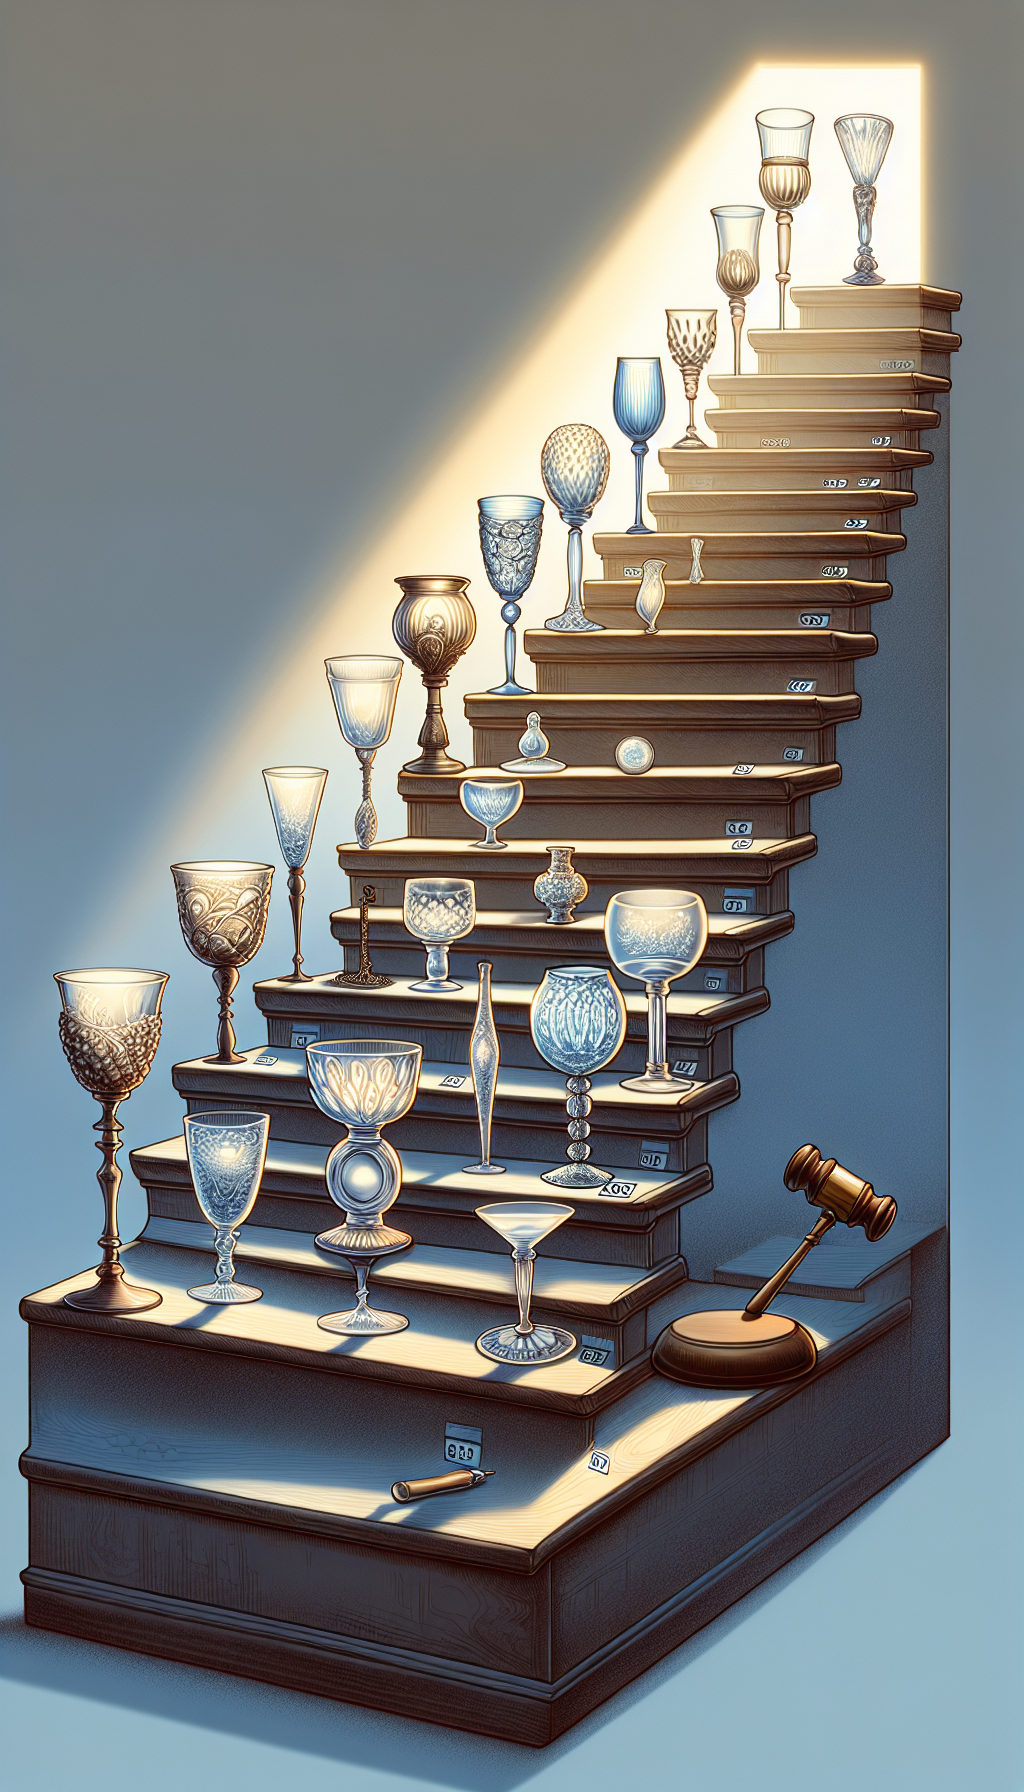 An illustration portrays a whimsical timeline, with elegant antique crystal glasses ascending steps labeled with different historical eras. The oldest and most ornate glass sits atop a pedestal, emitting a soft glow and surrounded by appraising tools like a magnifying glass and an auction gavel, subtly implying its high value. The glass styles vary, embodying the passage of time and value appreciation.